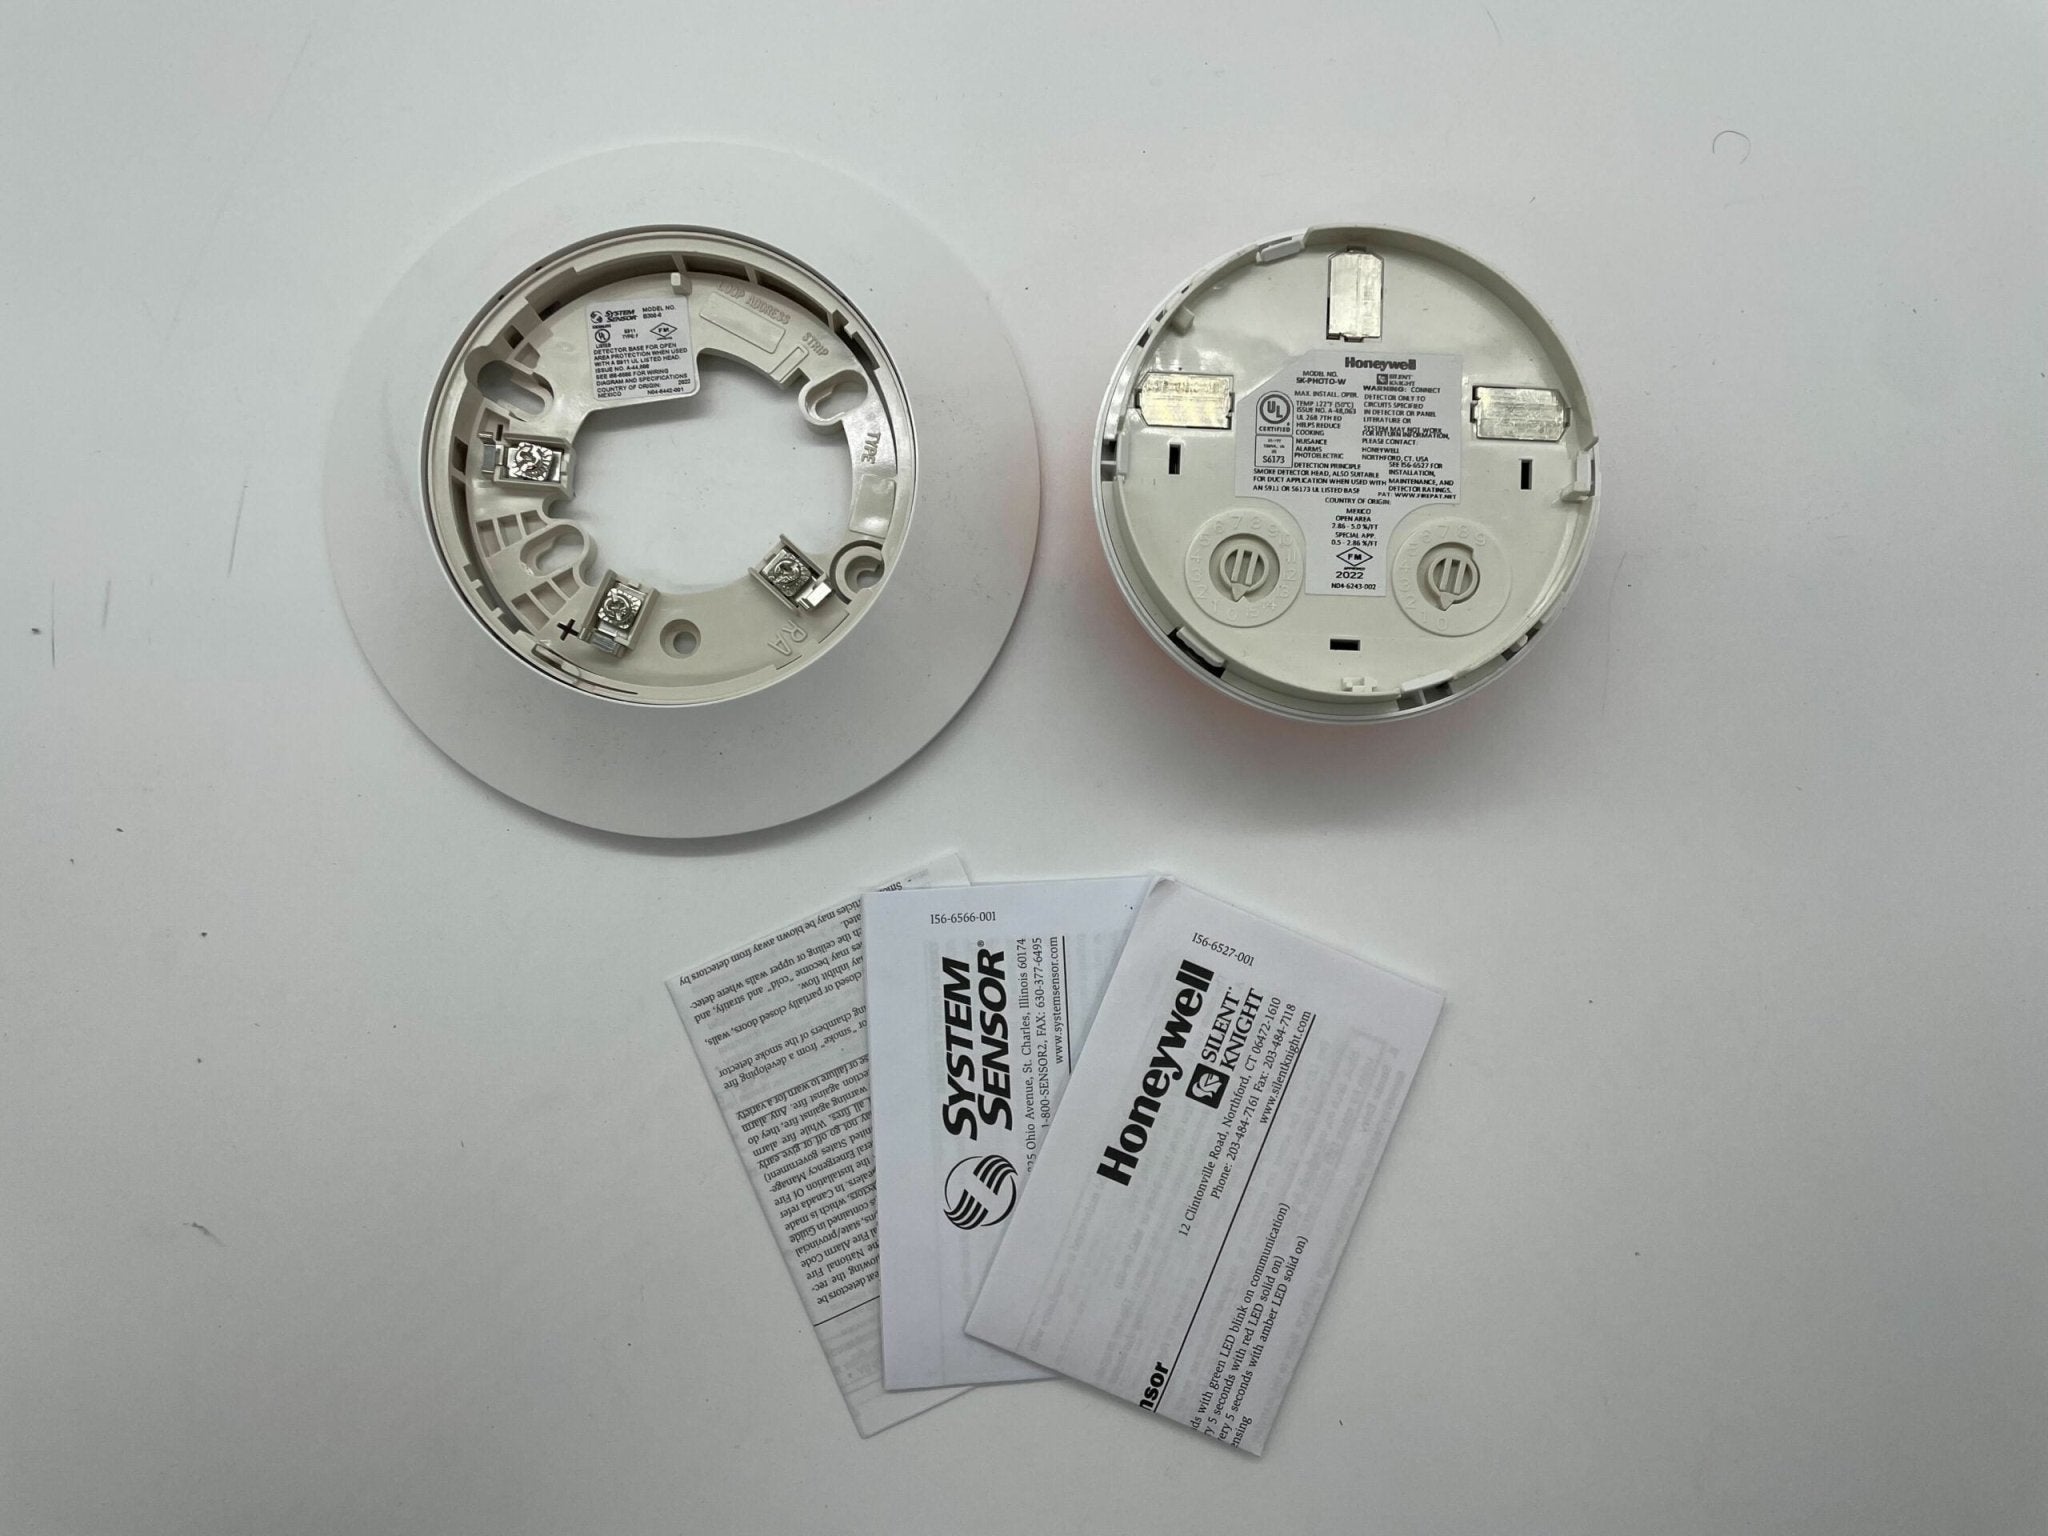 Silent Knight SK-PHOTO-W Addressable Photoelectric Smoke Detector - The Fire Alarm Supplier